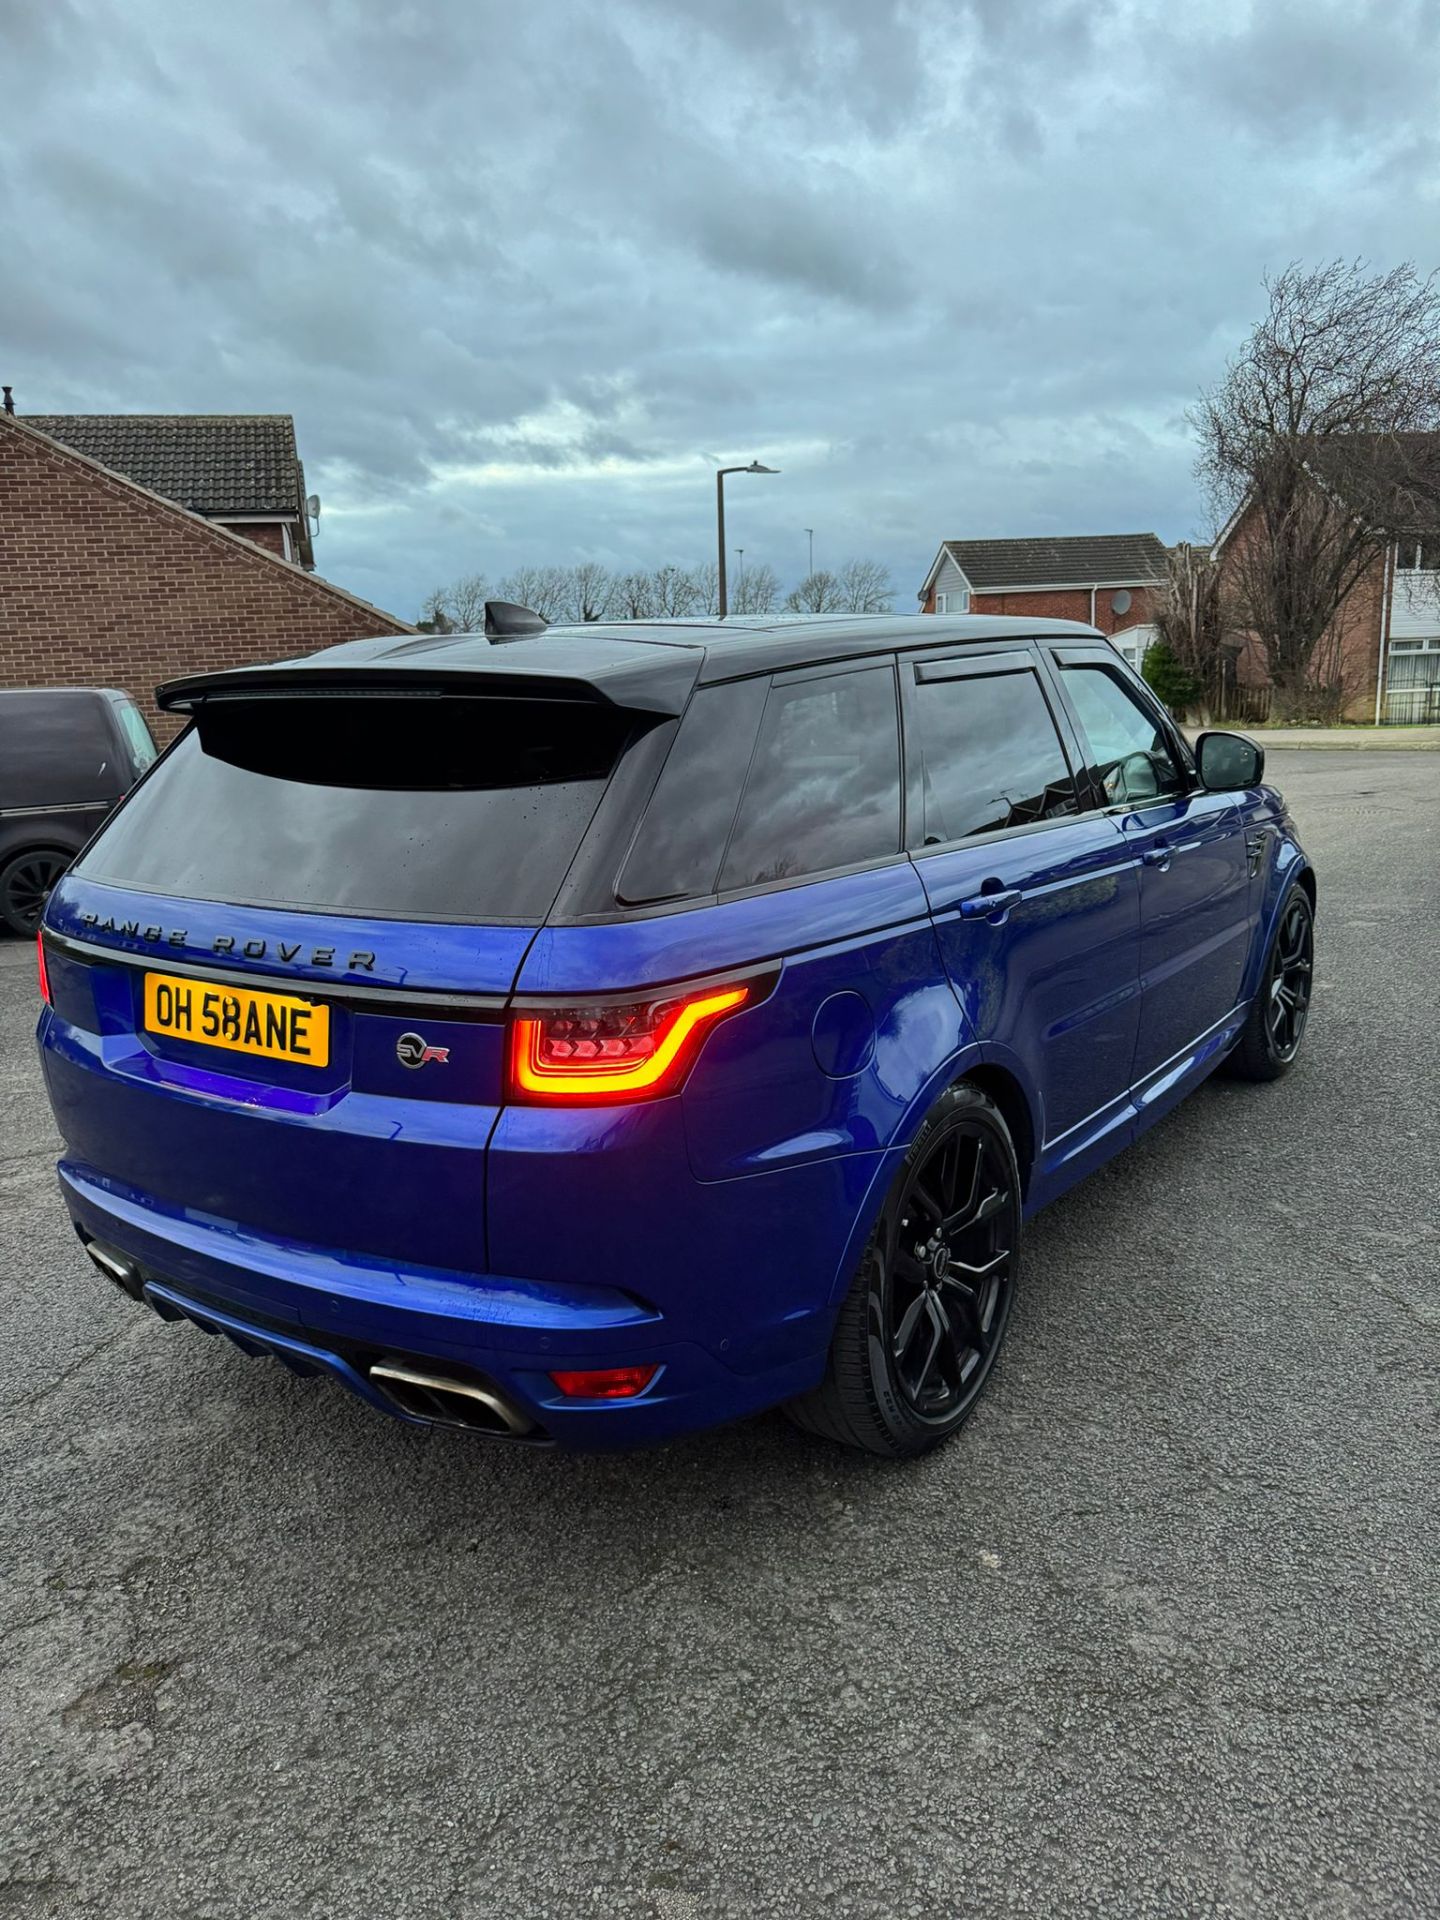 2018 18 RANGE ROVER SVR - 62K MILES WITH FULL LAND ROVER HISTORY - EXTREMELY CLEAN EXAMPLE. - Image 8 of 10